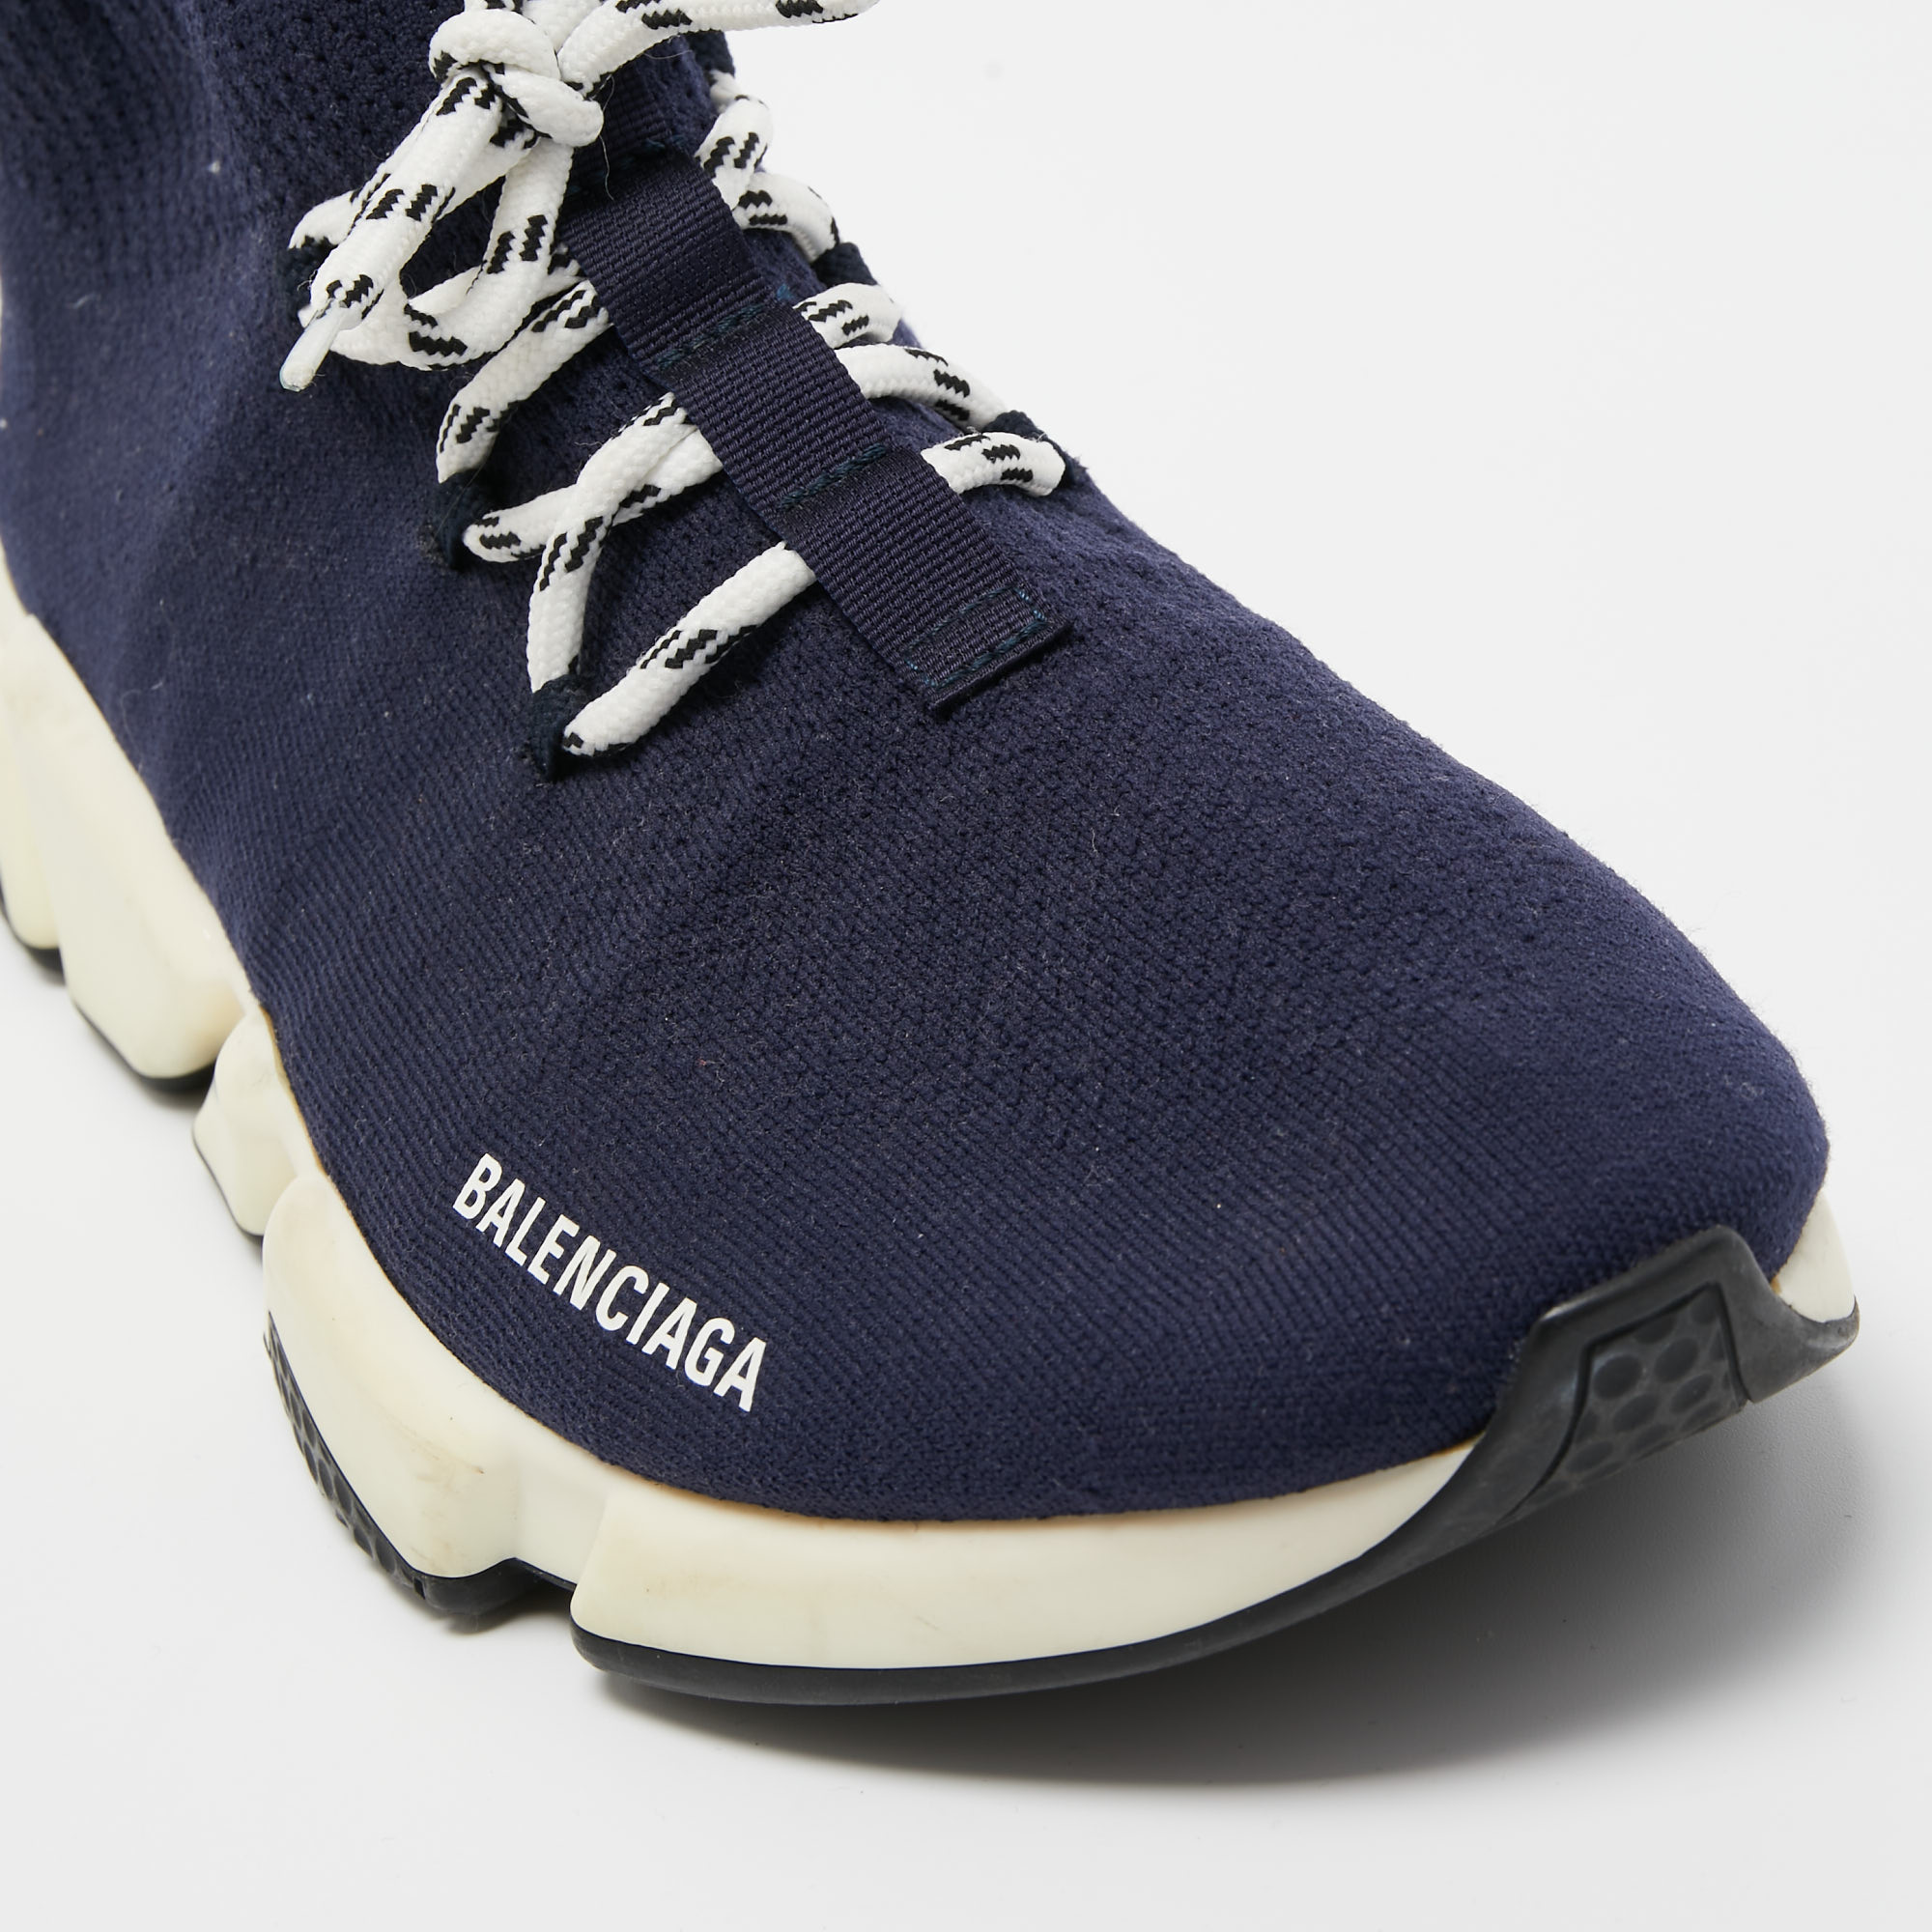 Balenciaga Navy Blue Knit Fabric Speed Trainer Sneakers Size 45